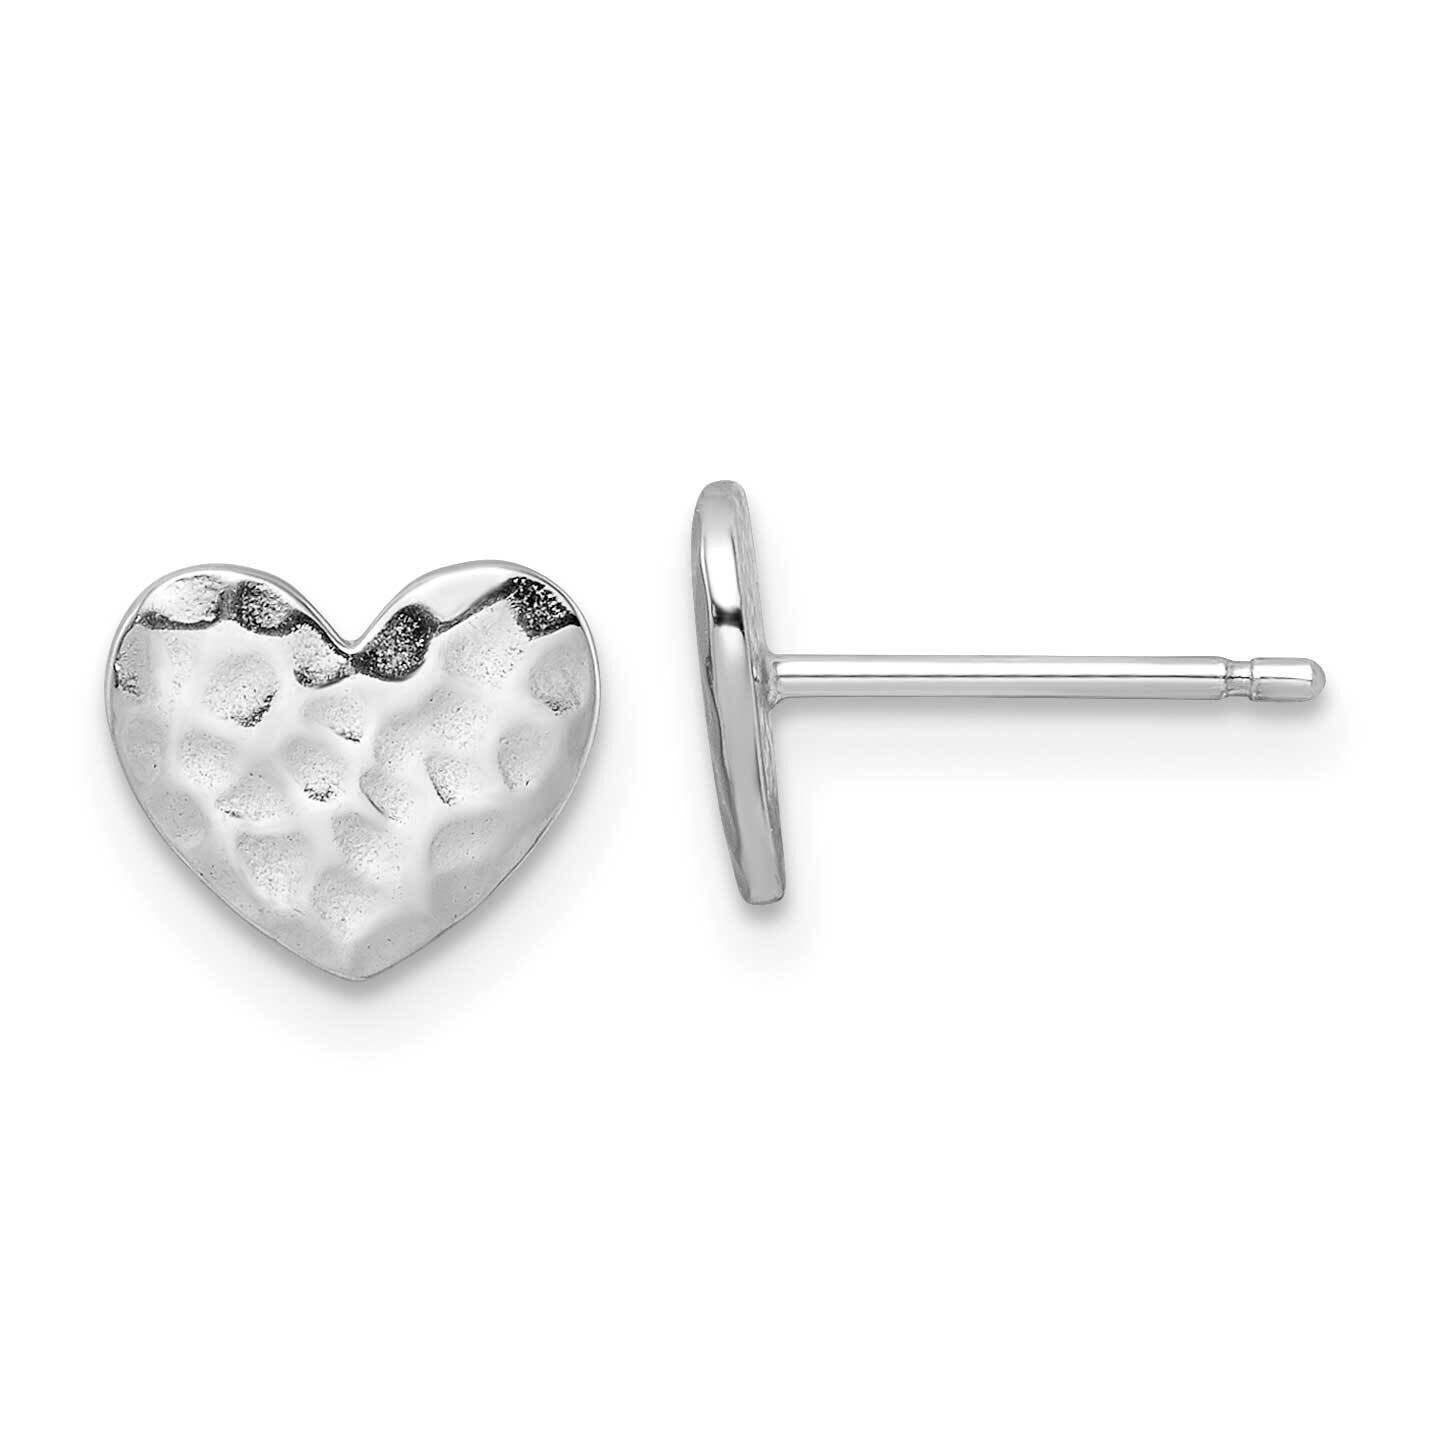 Hammered Heart Post Earrings Sterling Silver Rhodium-Plated Polished QE16423